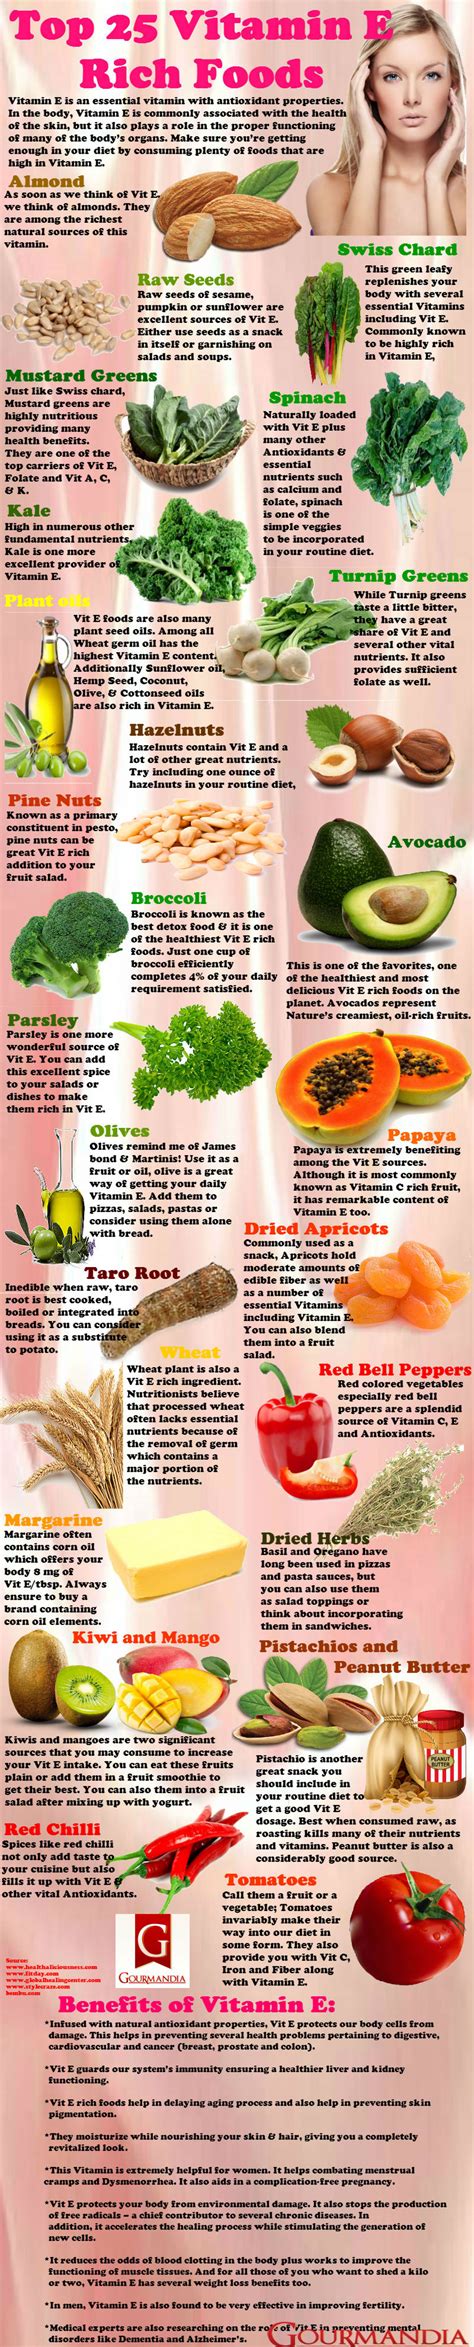 These amounts are substantially higher than the recommended dietary allowances. Top 25 Vitamin E Rich Foods | Visual.ly